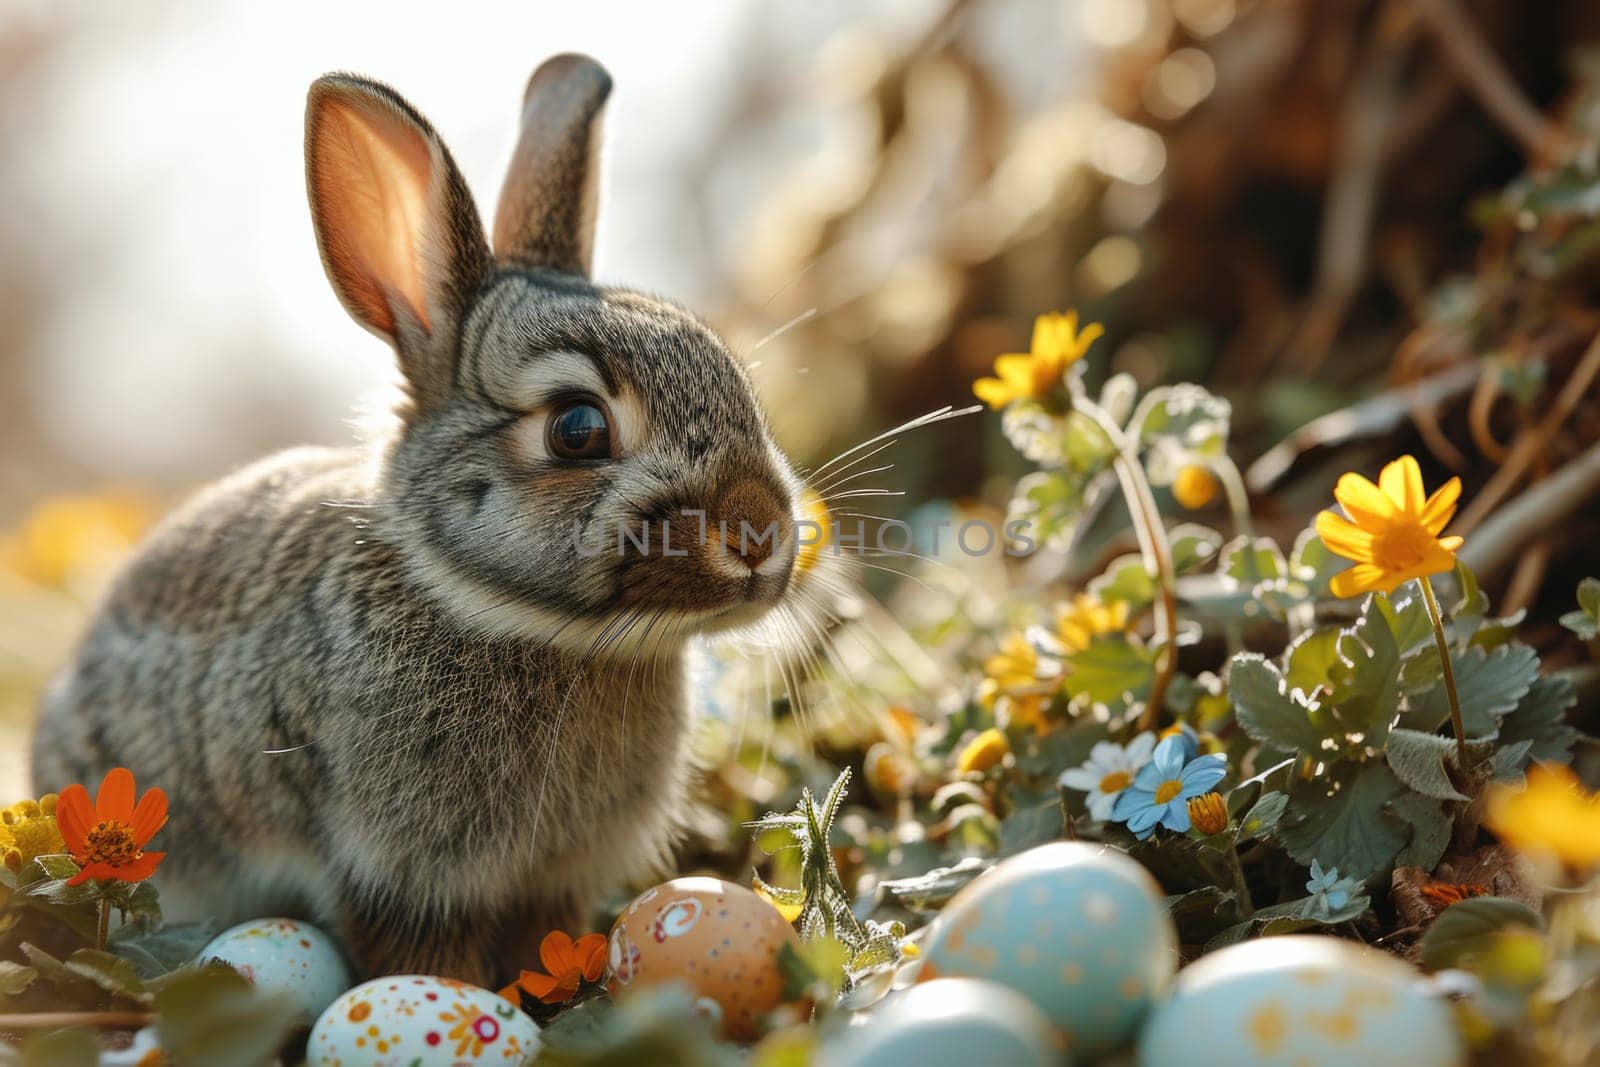 Rabbit in the Spring Forest: Easter Eggs and Bright Flowers by Yurich32